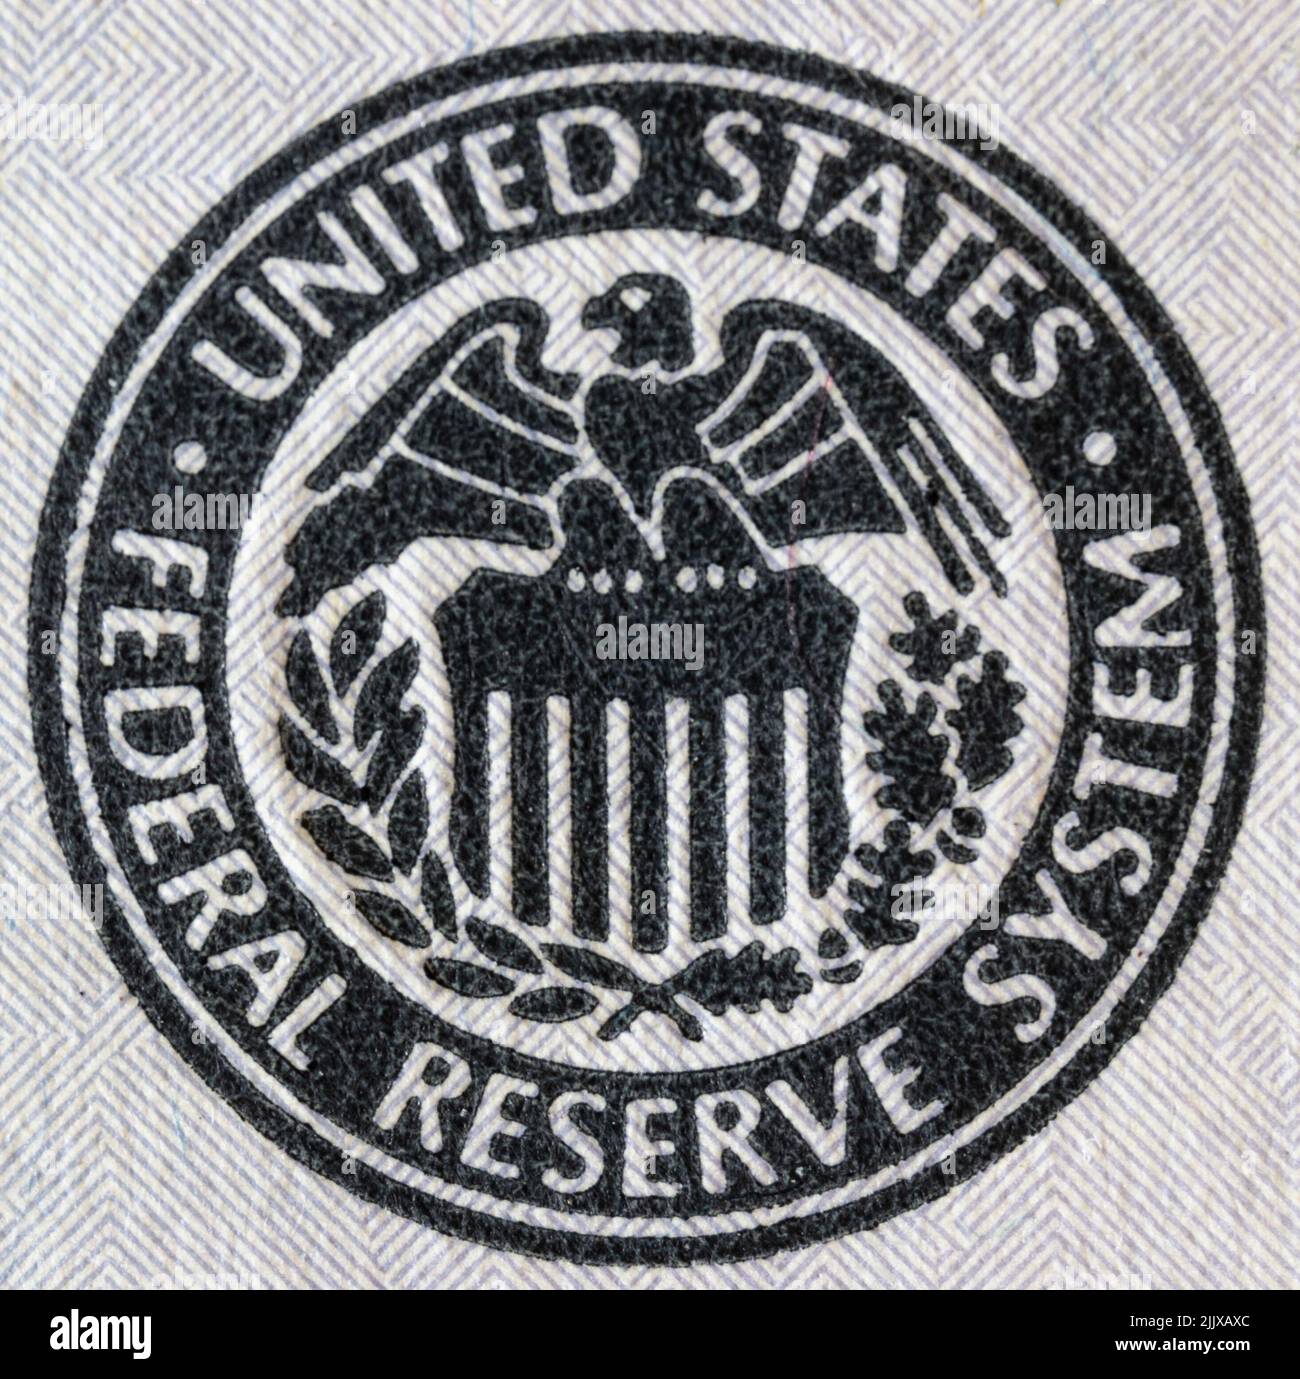 Federal Reserve System seal. The Fed's responsibilities include setting interest rates, managing the money supply, and regulating financial markets. Stock Photo